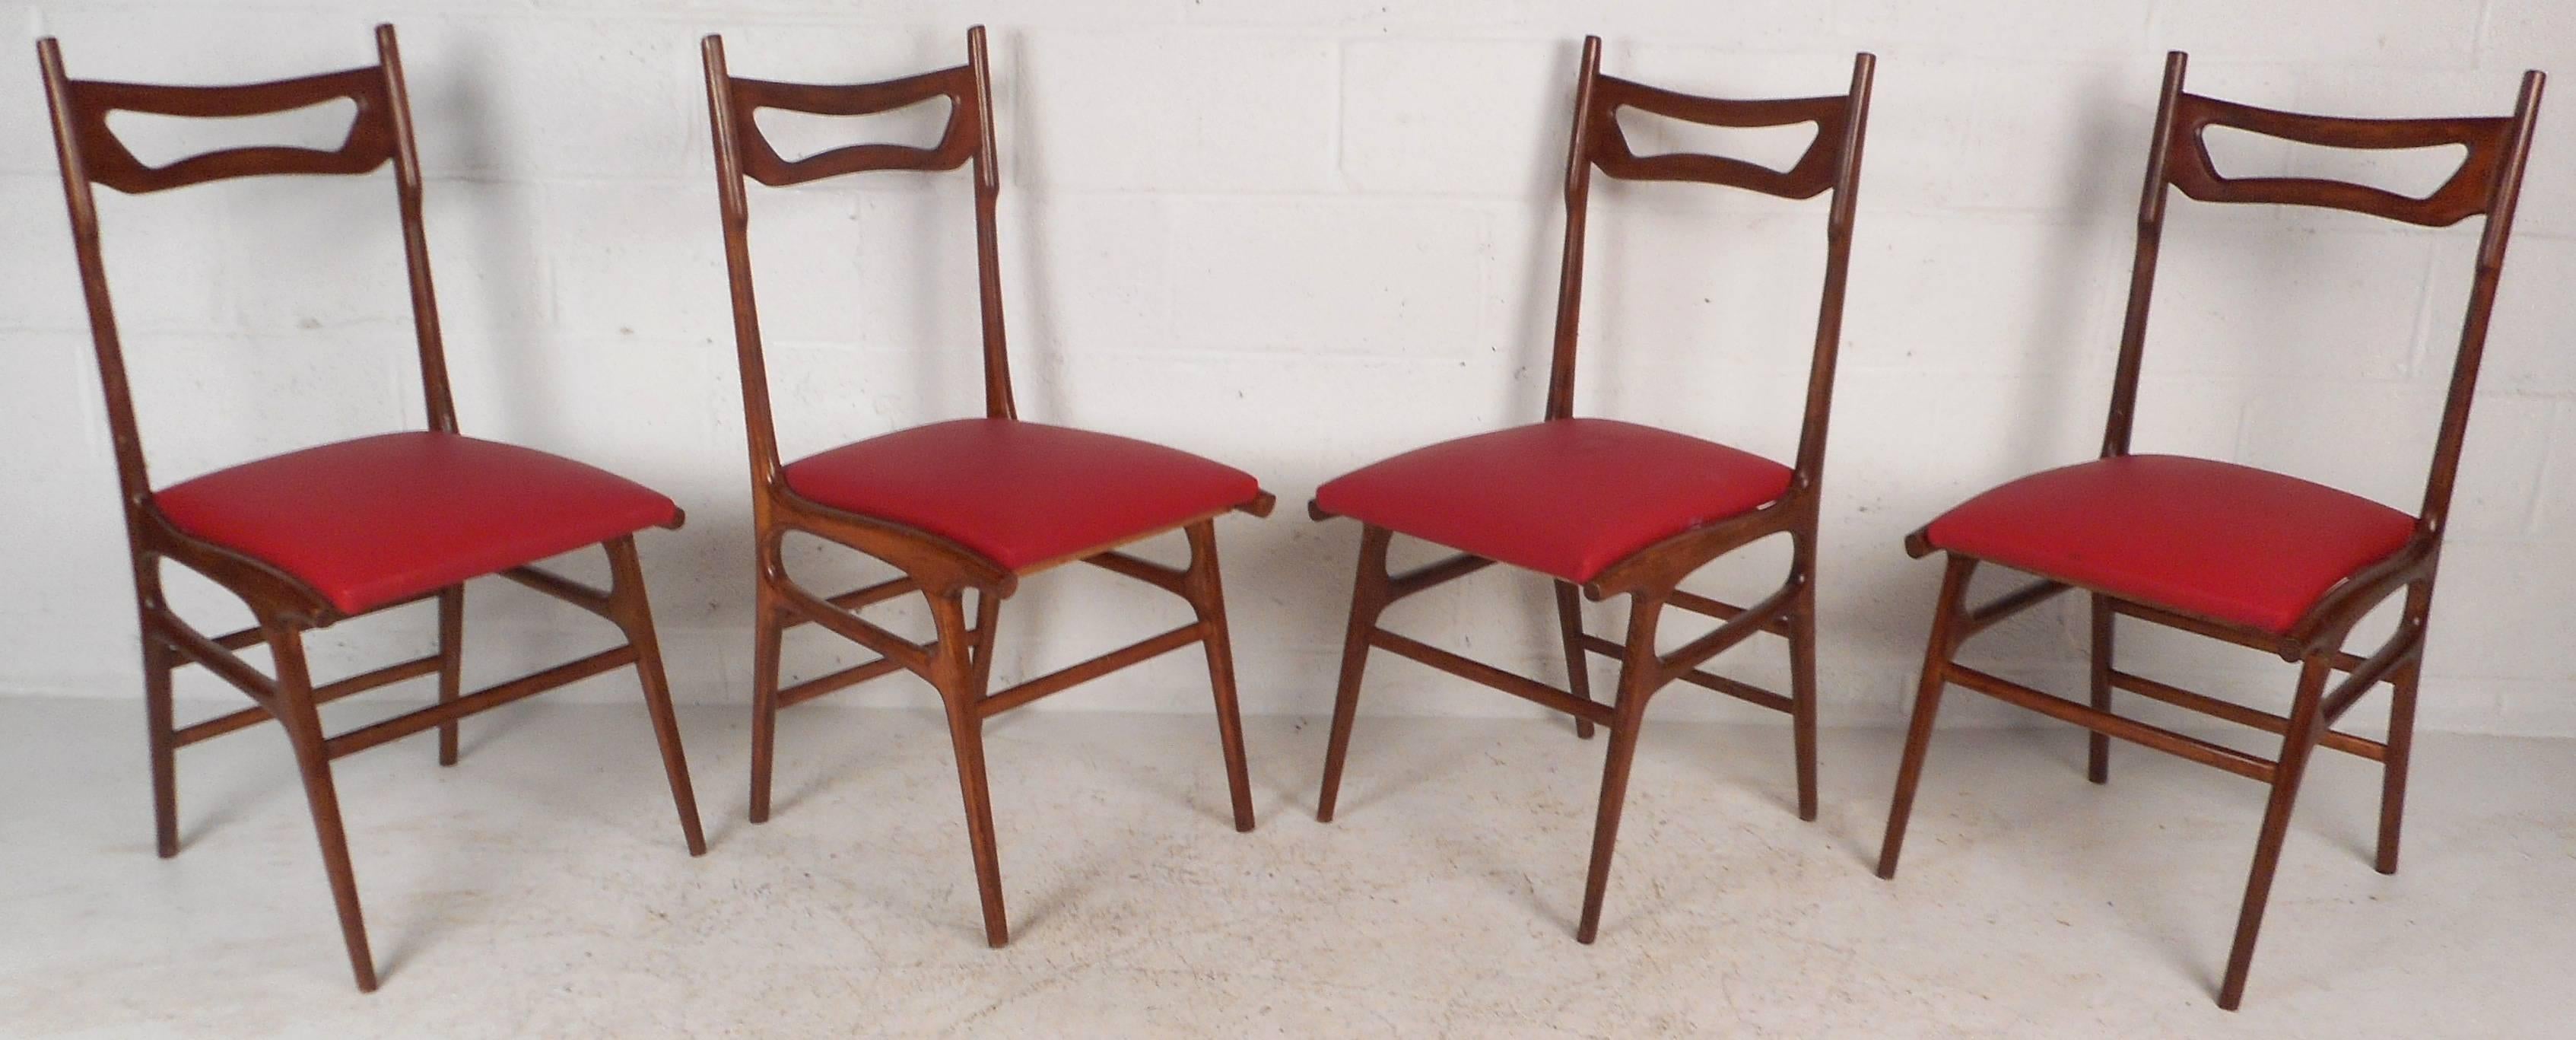 This gorgeous set of four vintage modern Italian dining chairs feature sculpted walnut frames with angled and tapered legs. Unique "Cut-out" design on an unusually high backrest ensures comfortable seating without sacrificing style.